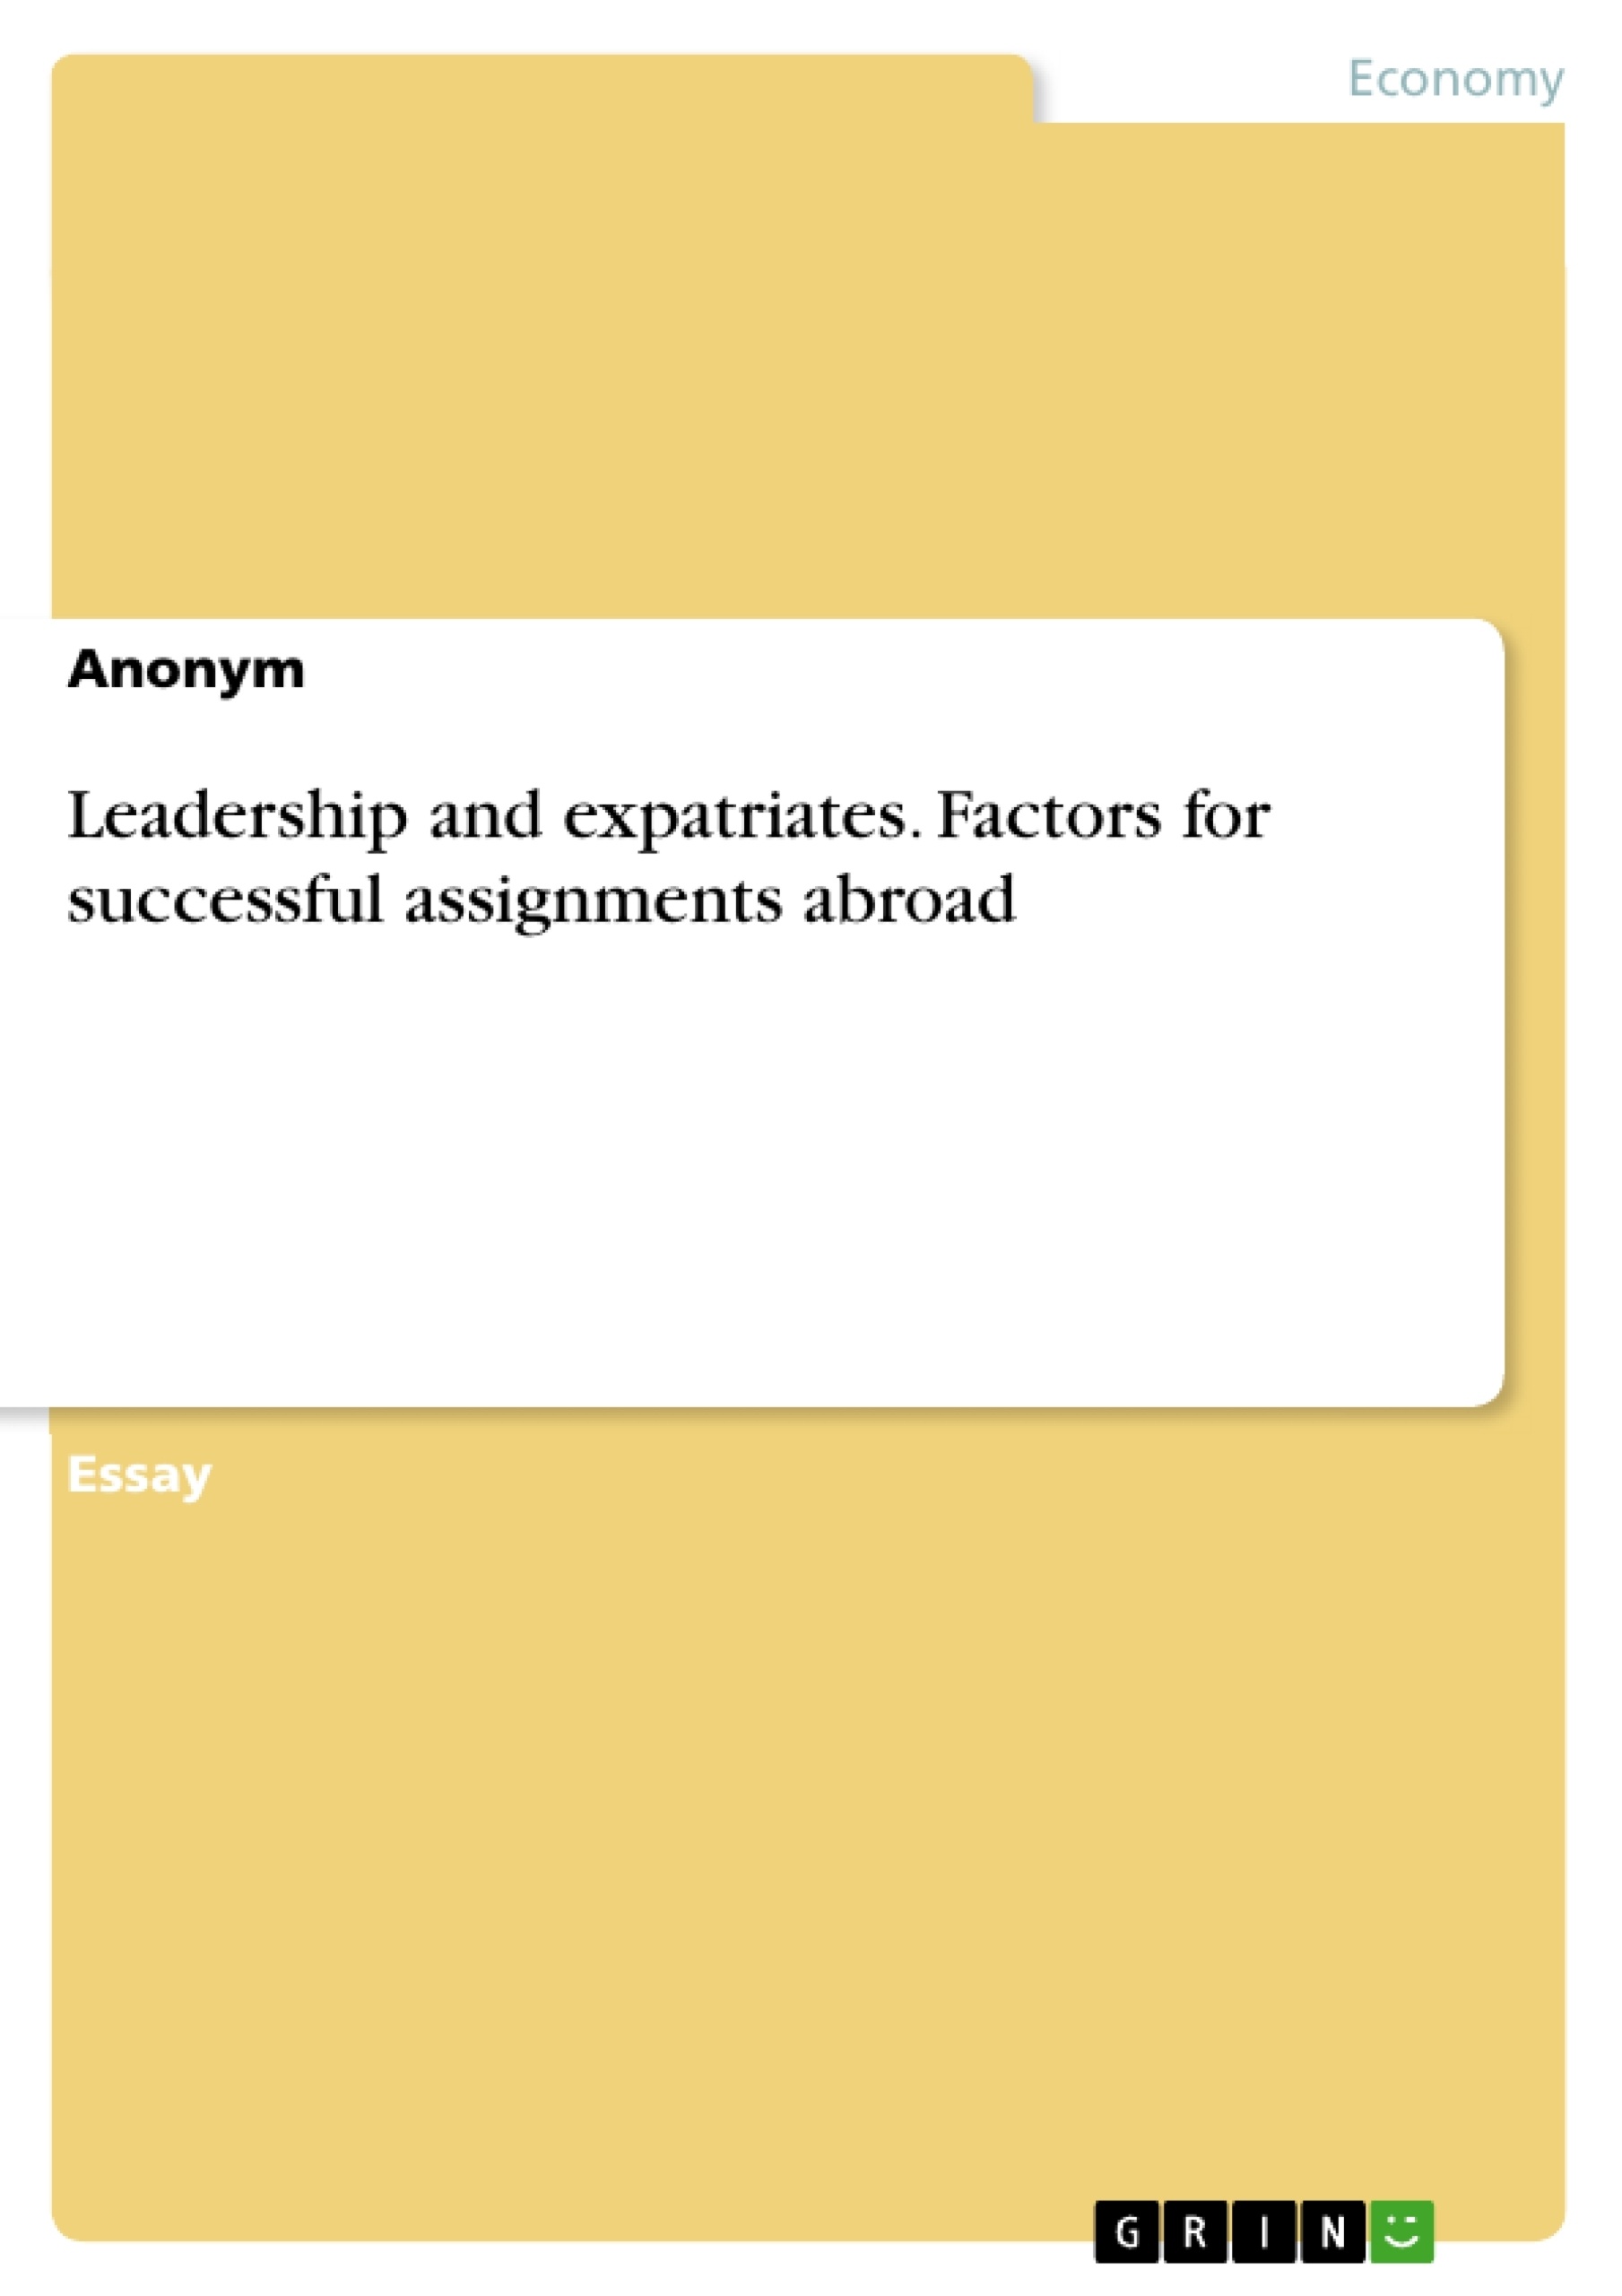 Title: Leadership and expatriates. Factors for successful assignments abroad